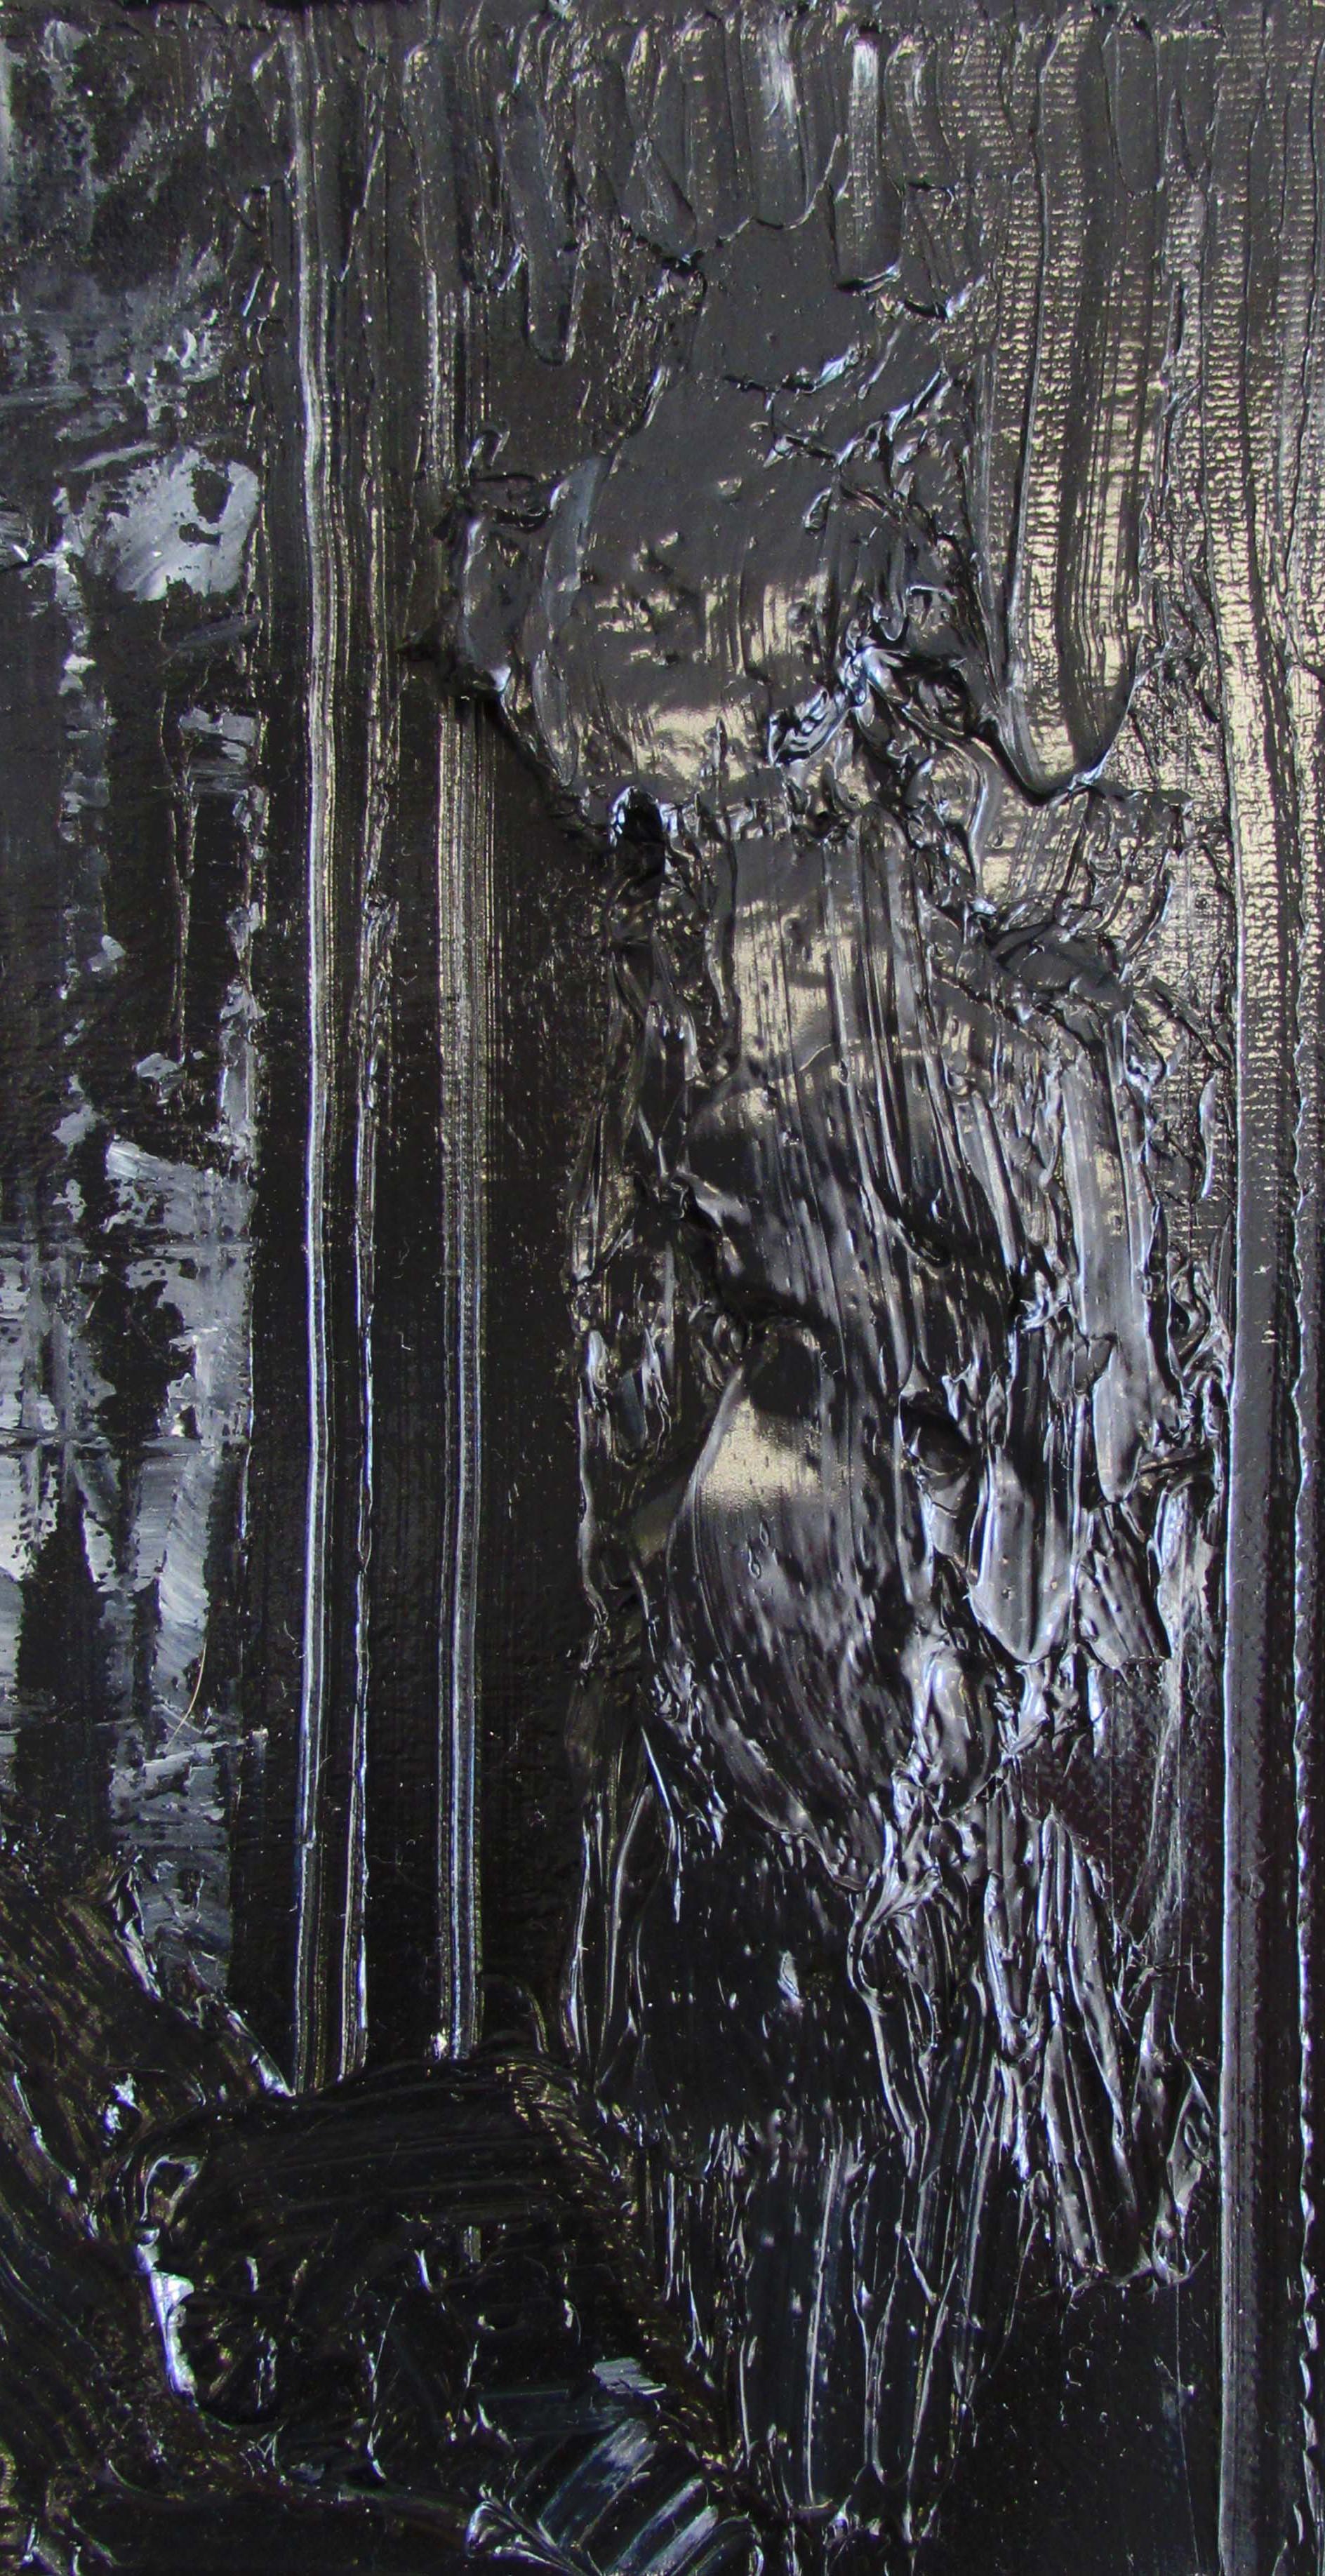 Untitled 03 [Dissecting the Unknown 03] - Contemporary, Black, Monochrome - Painting by Zsolt Berszán